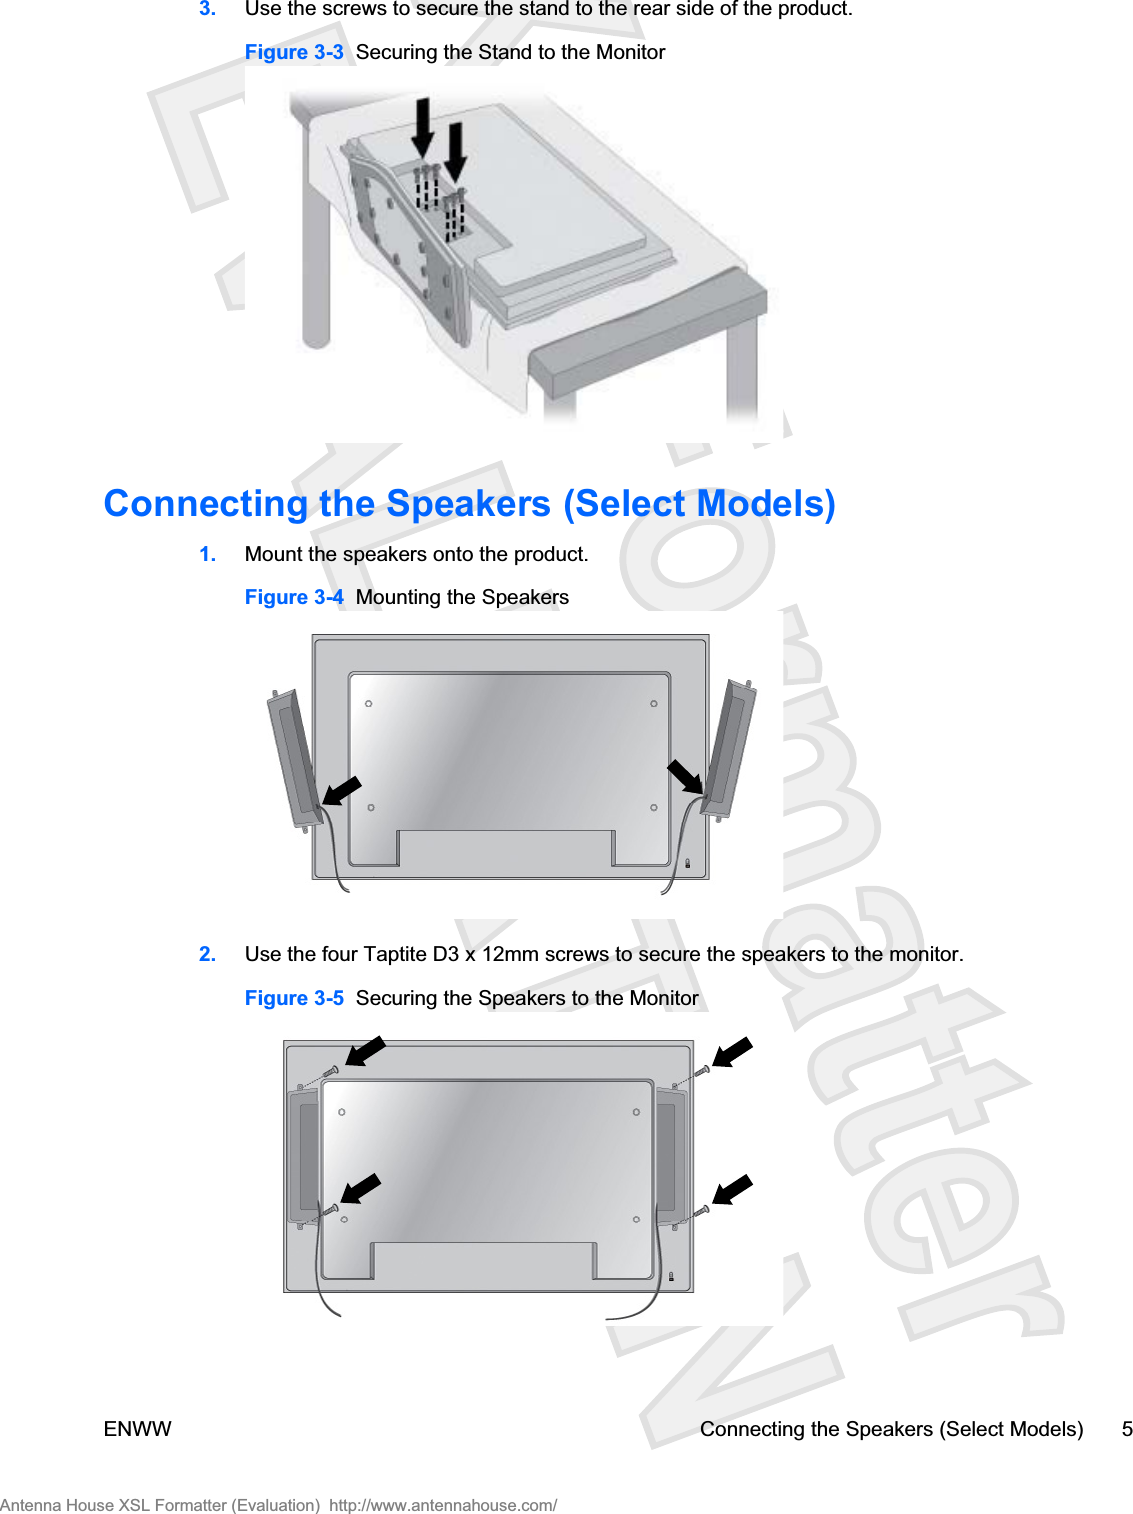 3. Use the screws to secure the stand to the rear side of the product.Figure 3-3  Securing the Stand to the MonitorConnecting the Speakers (Select Models)1. Mount the speakers onto the product.Figure 3-4  Mounting the Speakers2. Use the four Taptite D3 x 12mm screws to secure the speakers to the monitor.Figure 3-5  Securing the Speakers to the MonitorENWW Connecting the Speakers (Select Models) 5Antenna House XSL Formatter (Evaluation)  http://www.antennahouse.com/